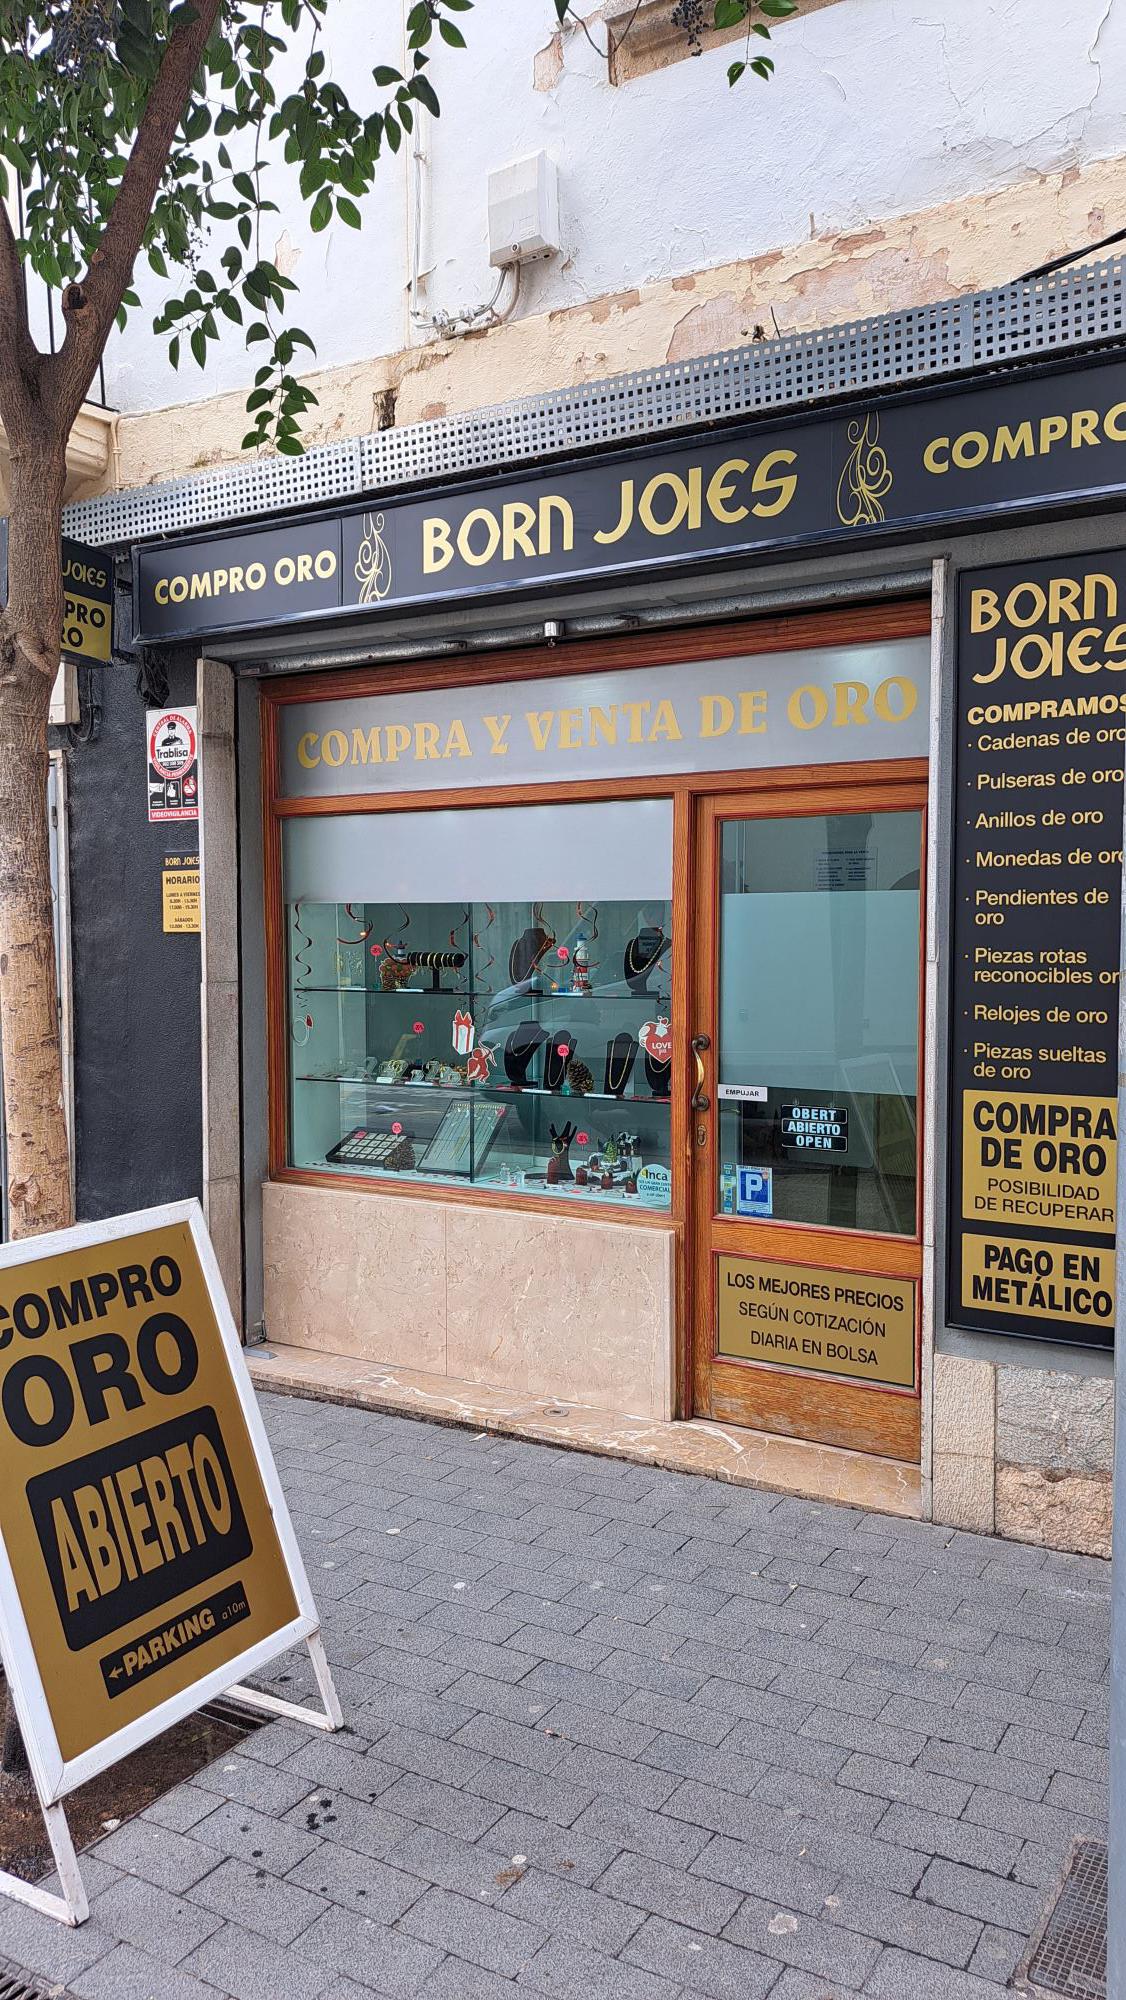 Images Compro Oro - Born Joies